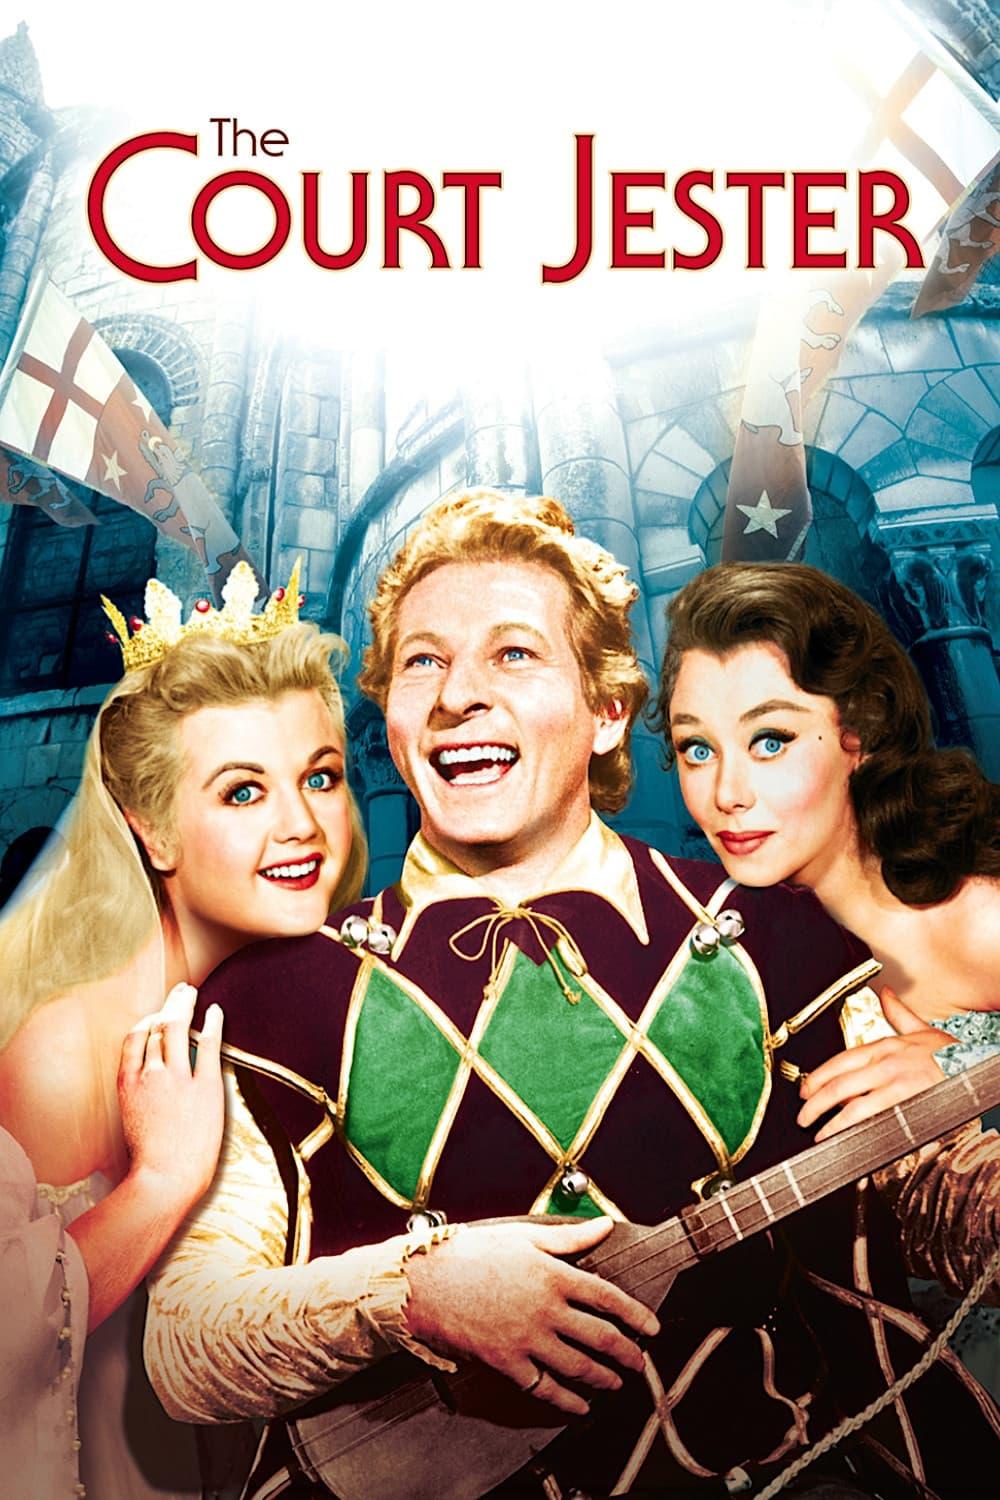 The Court Jester poster